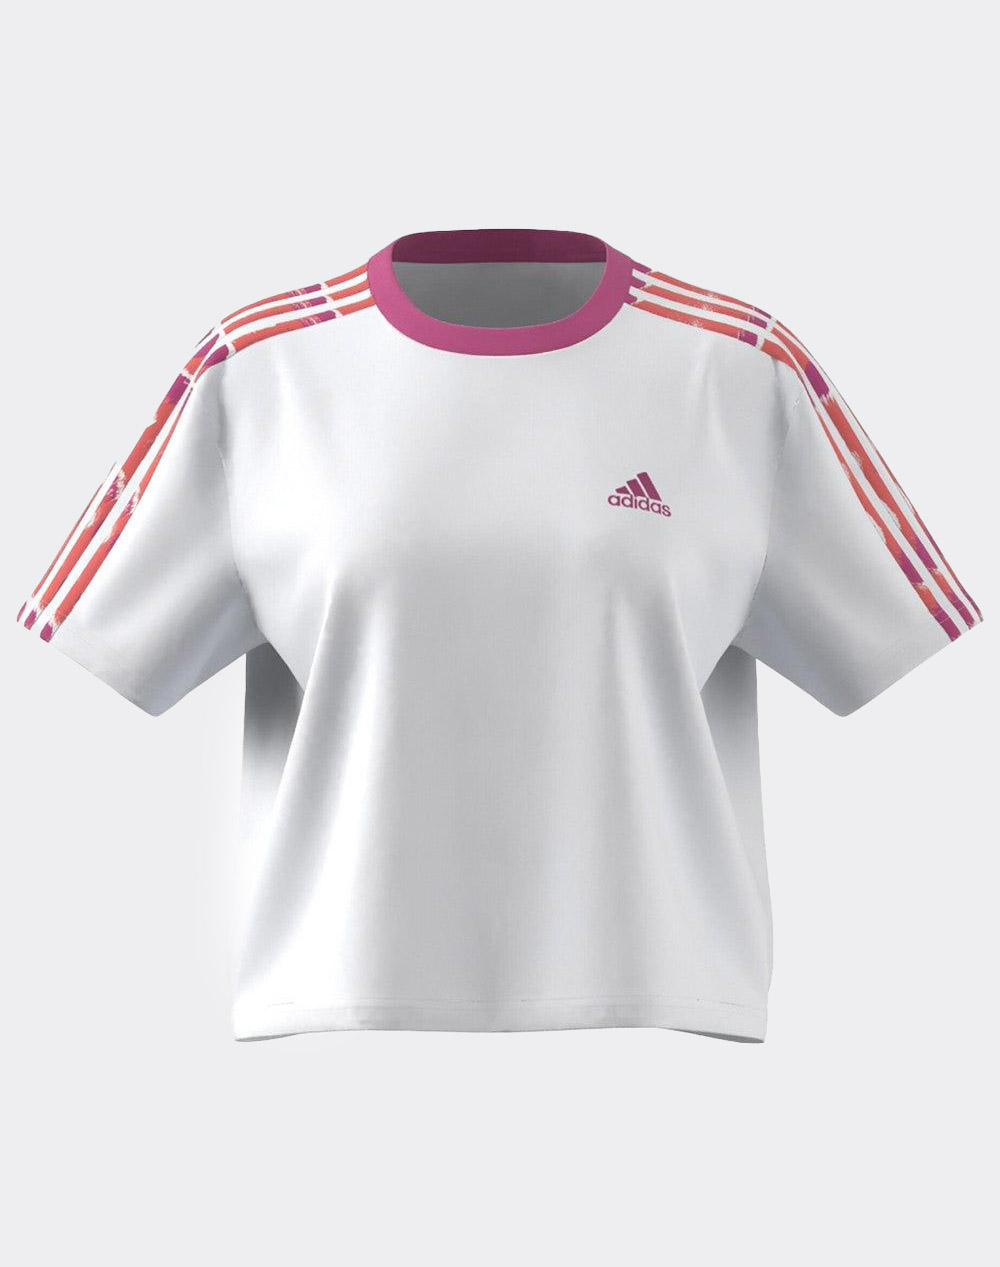 ADIDAS TOP White CR 3S TOP W 